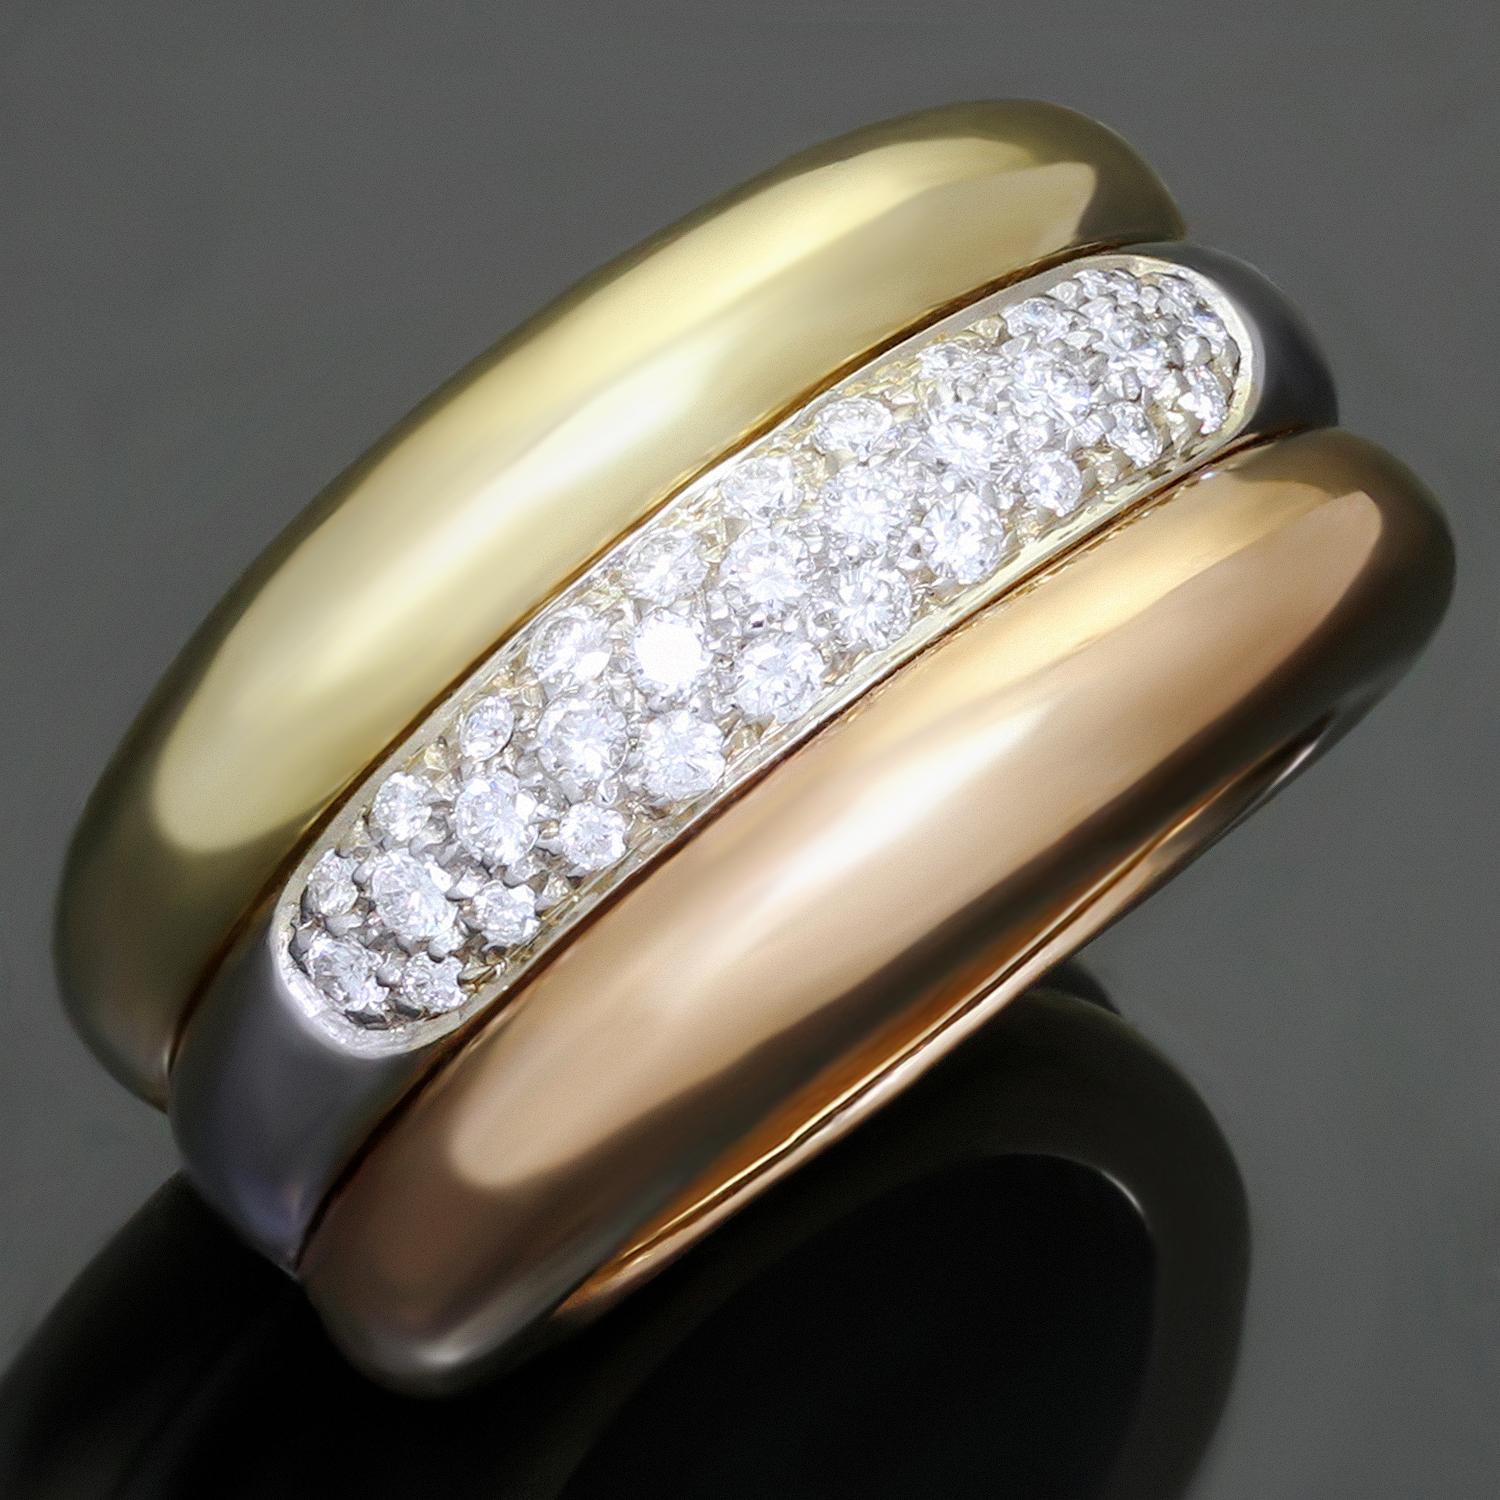 This gorgeous domed ring from Cartier's Trinity collection is crafted in 18k yellow, white and rose gold and pave-set with F-G VVS1-VVS2 brilliant-cut round diamonds of an estimated total 0.67 carats in in white gold. An iconic design fit for